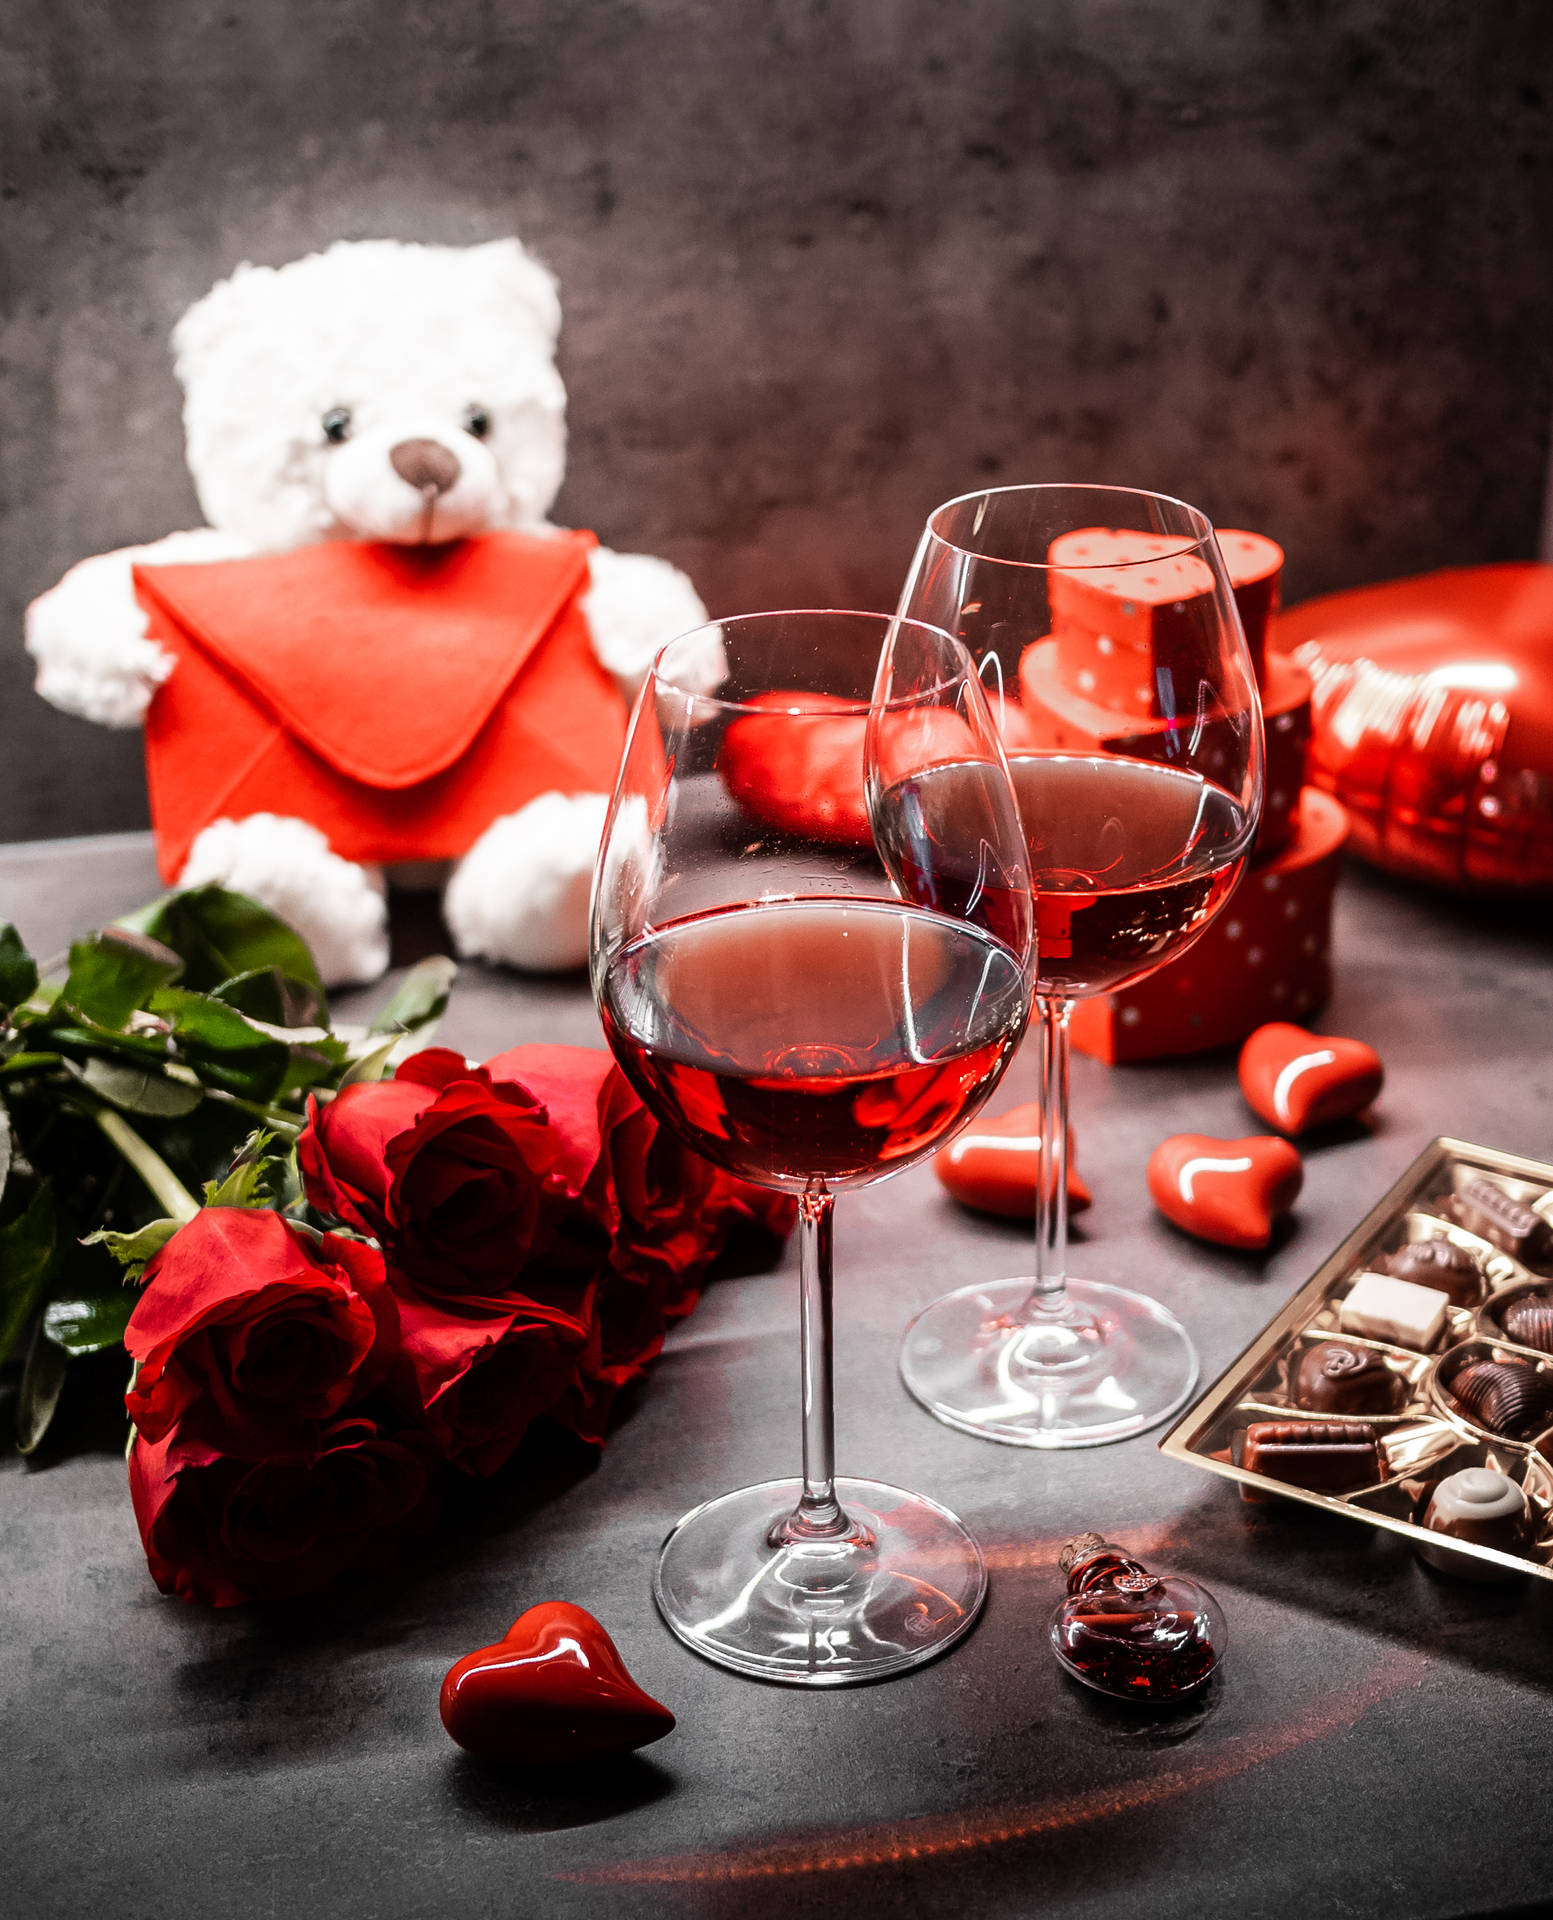 Romantic Love Flowers Red Roses And Wine